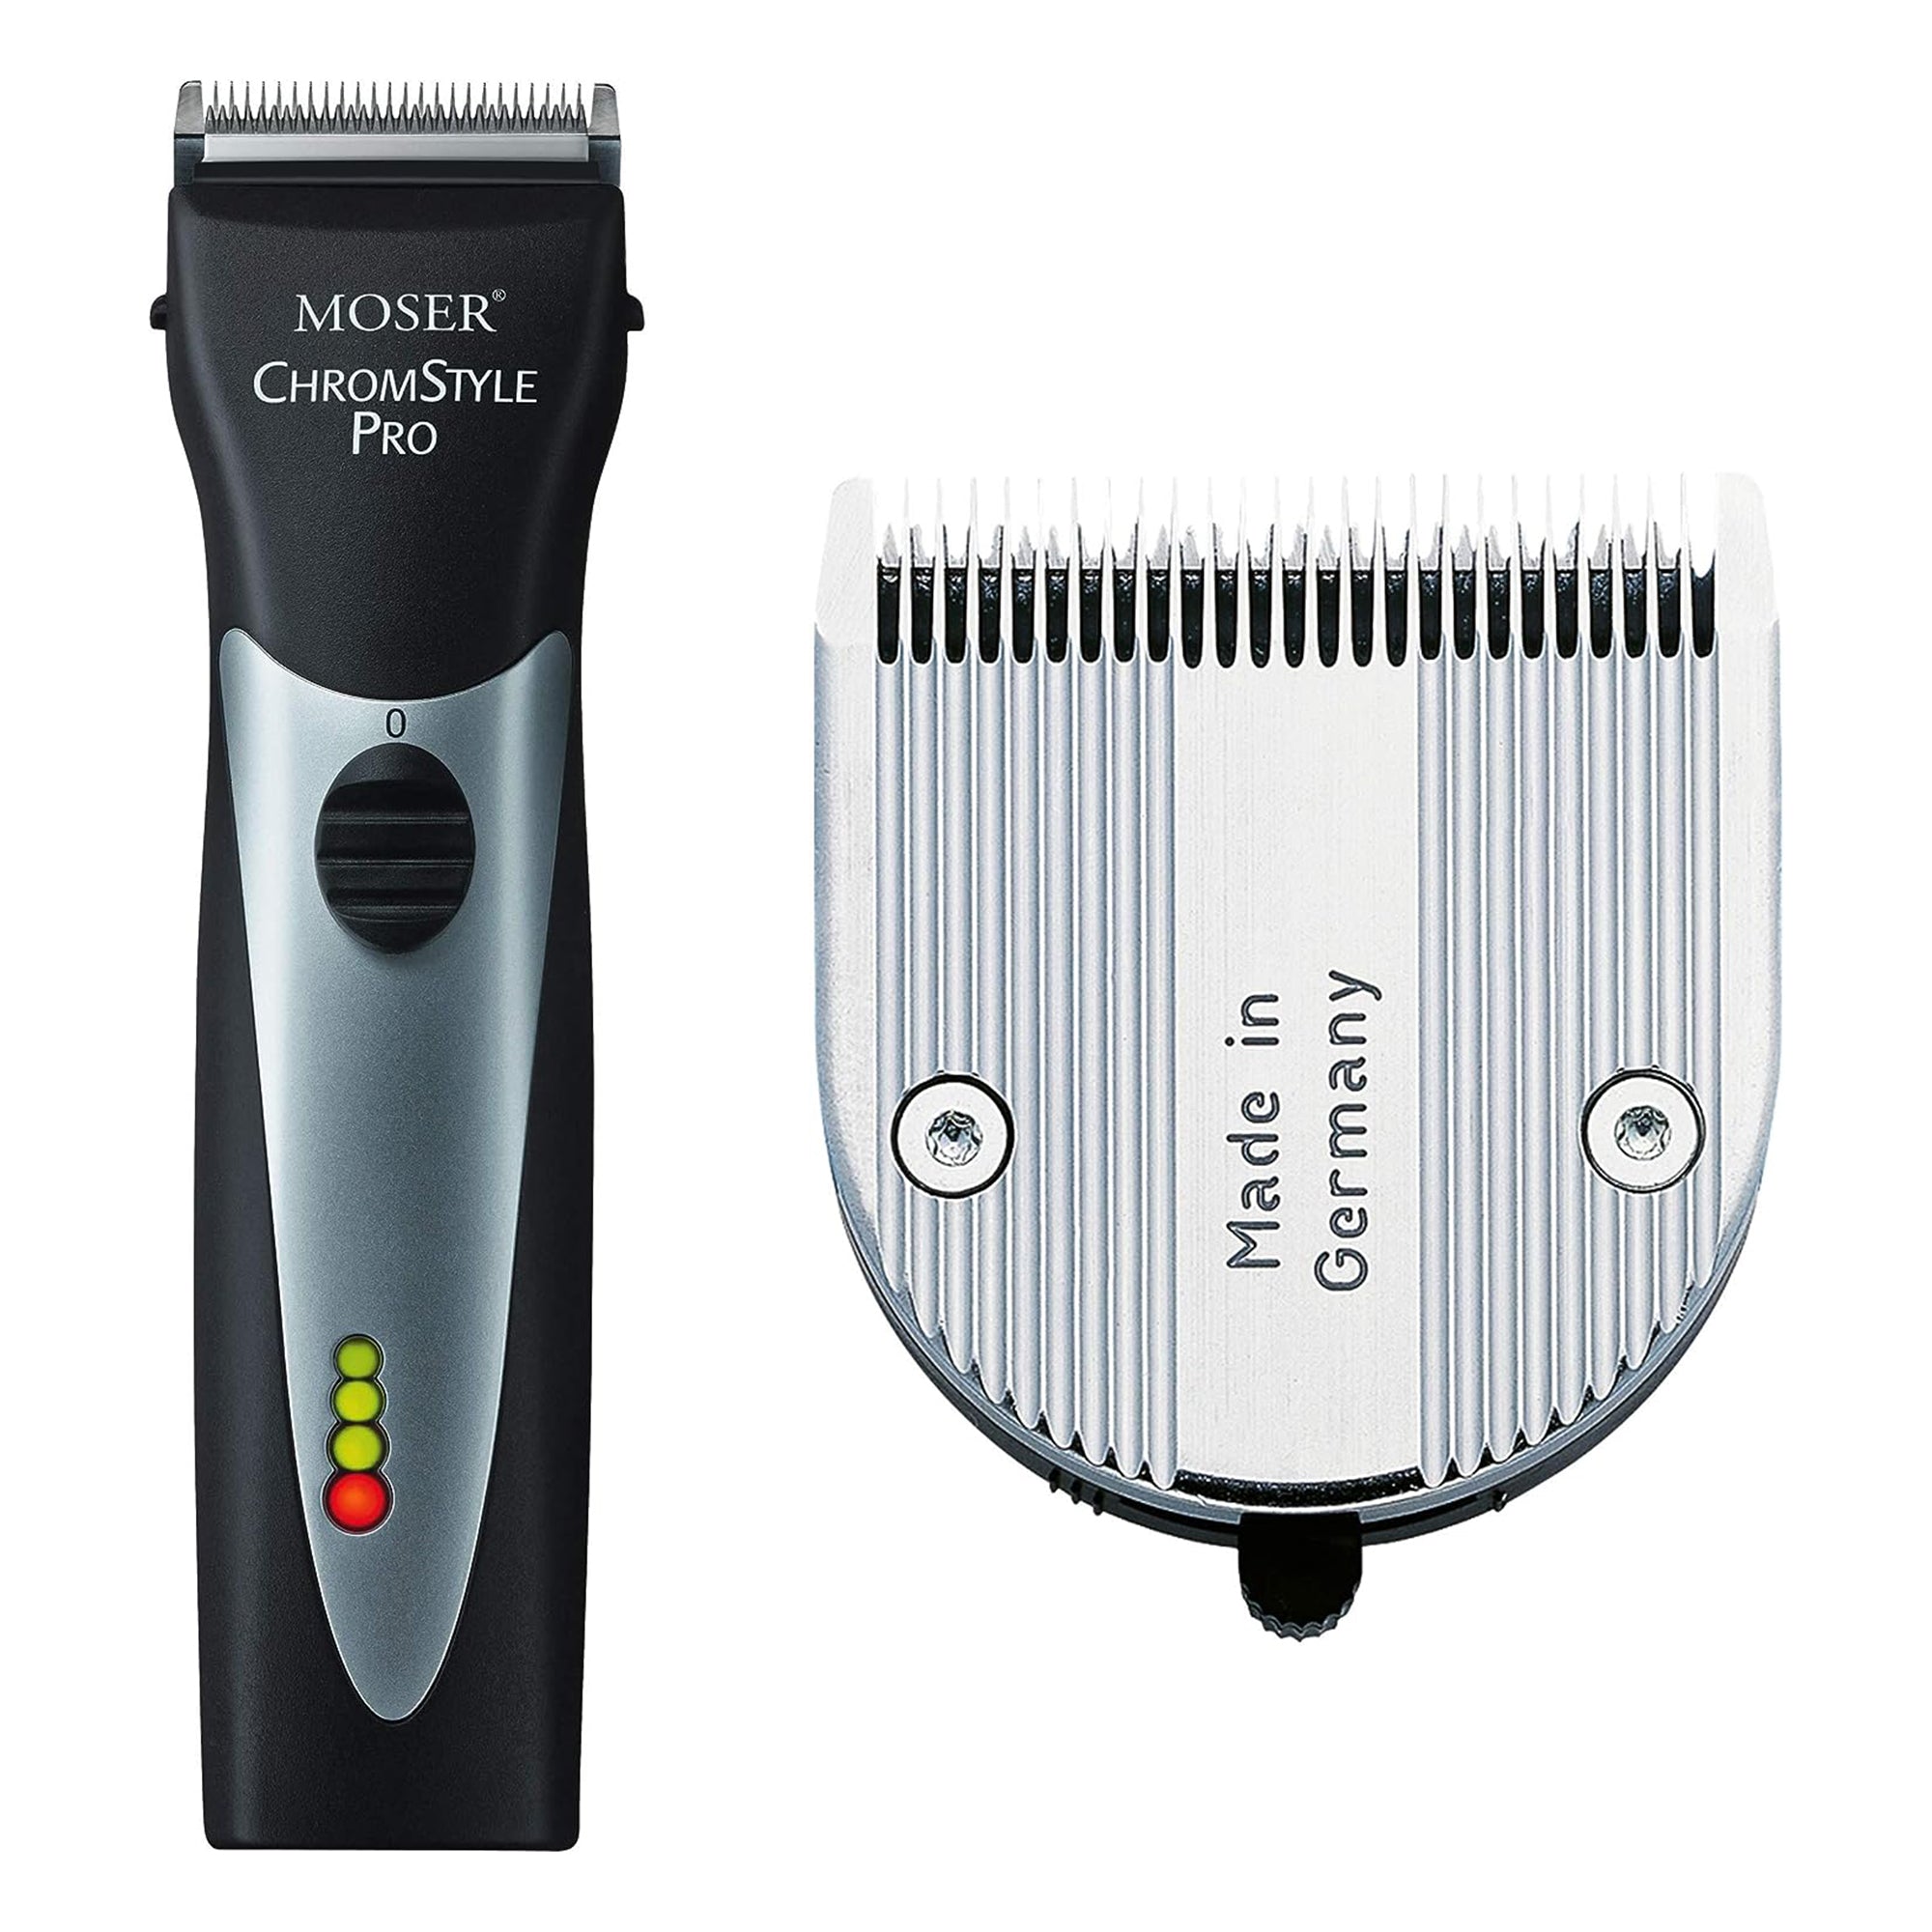 Chromstyle Pro Hair Clipper 1871-0181